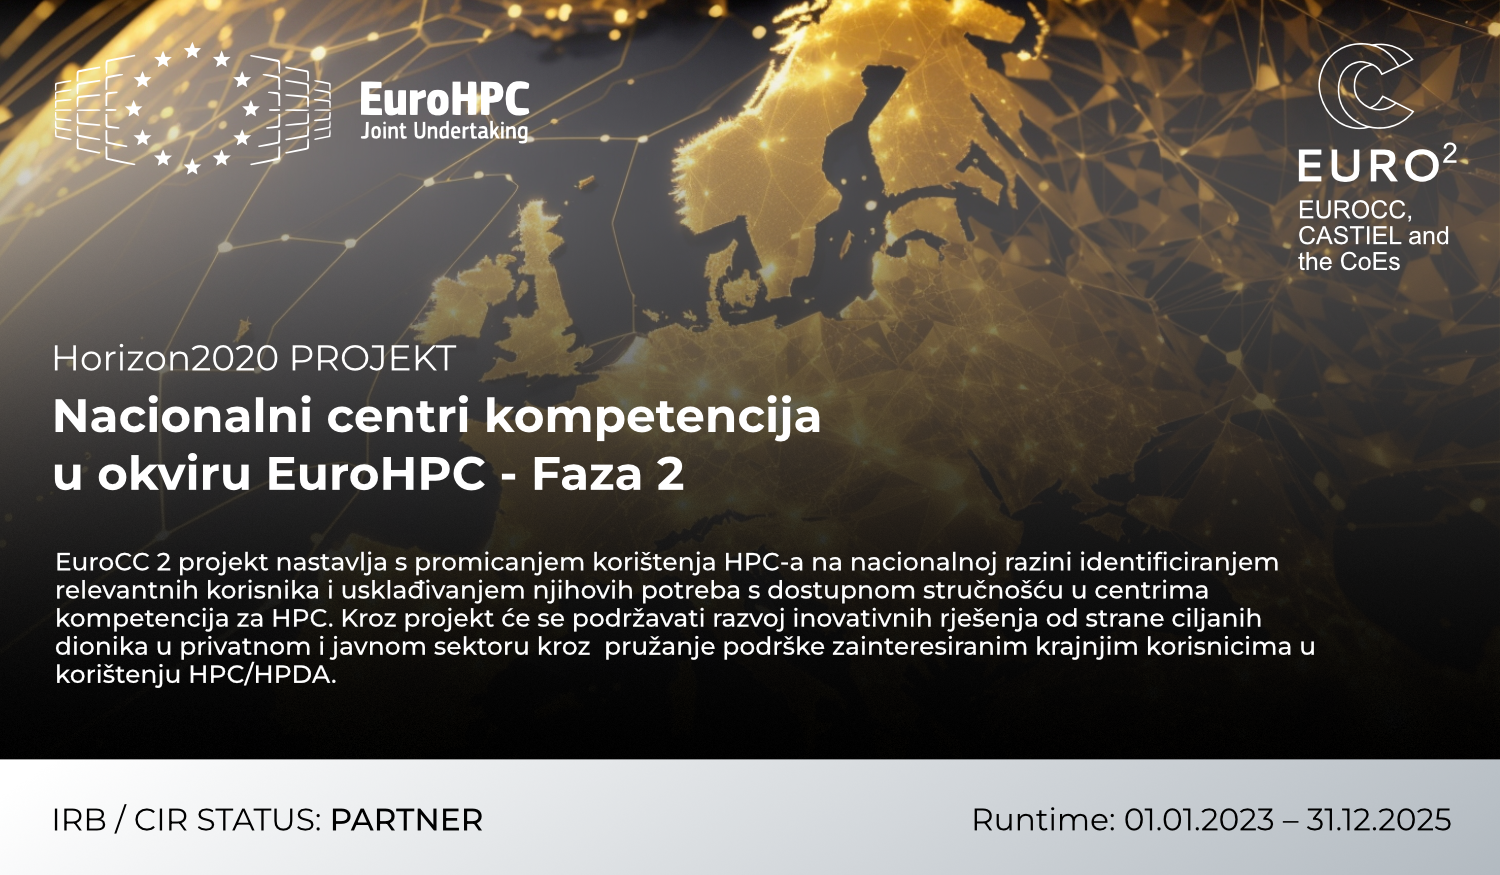 CIR continues to promote the use of HPC at the national level as part of the "EUROCC2" project